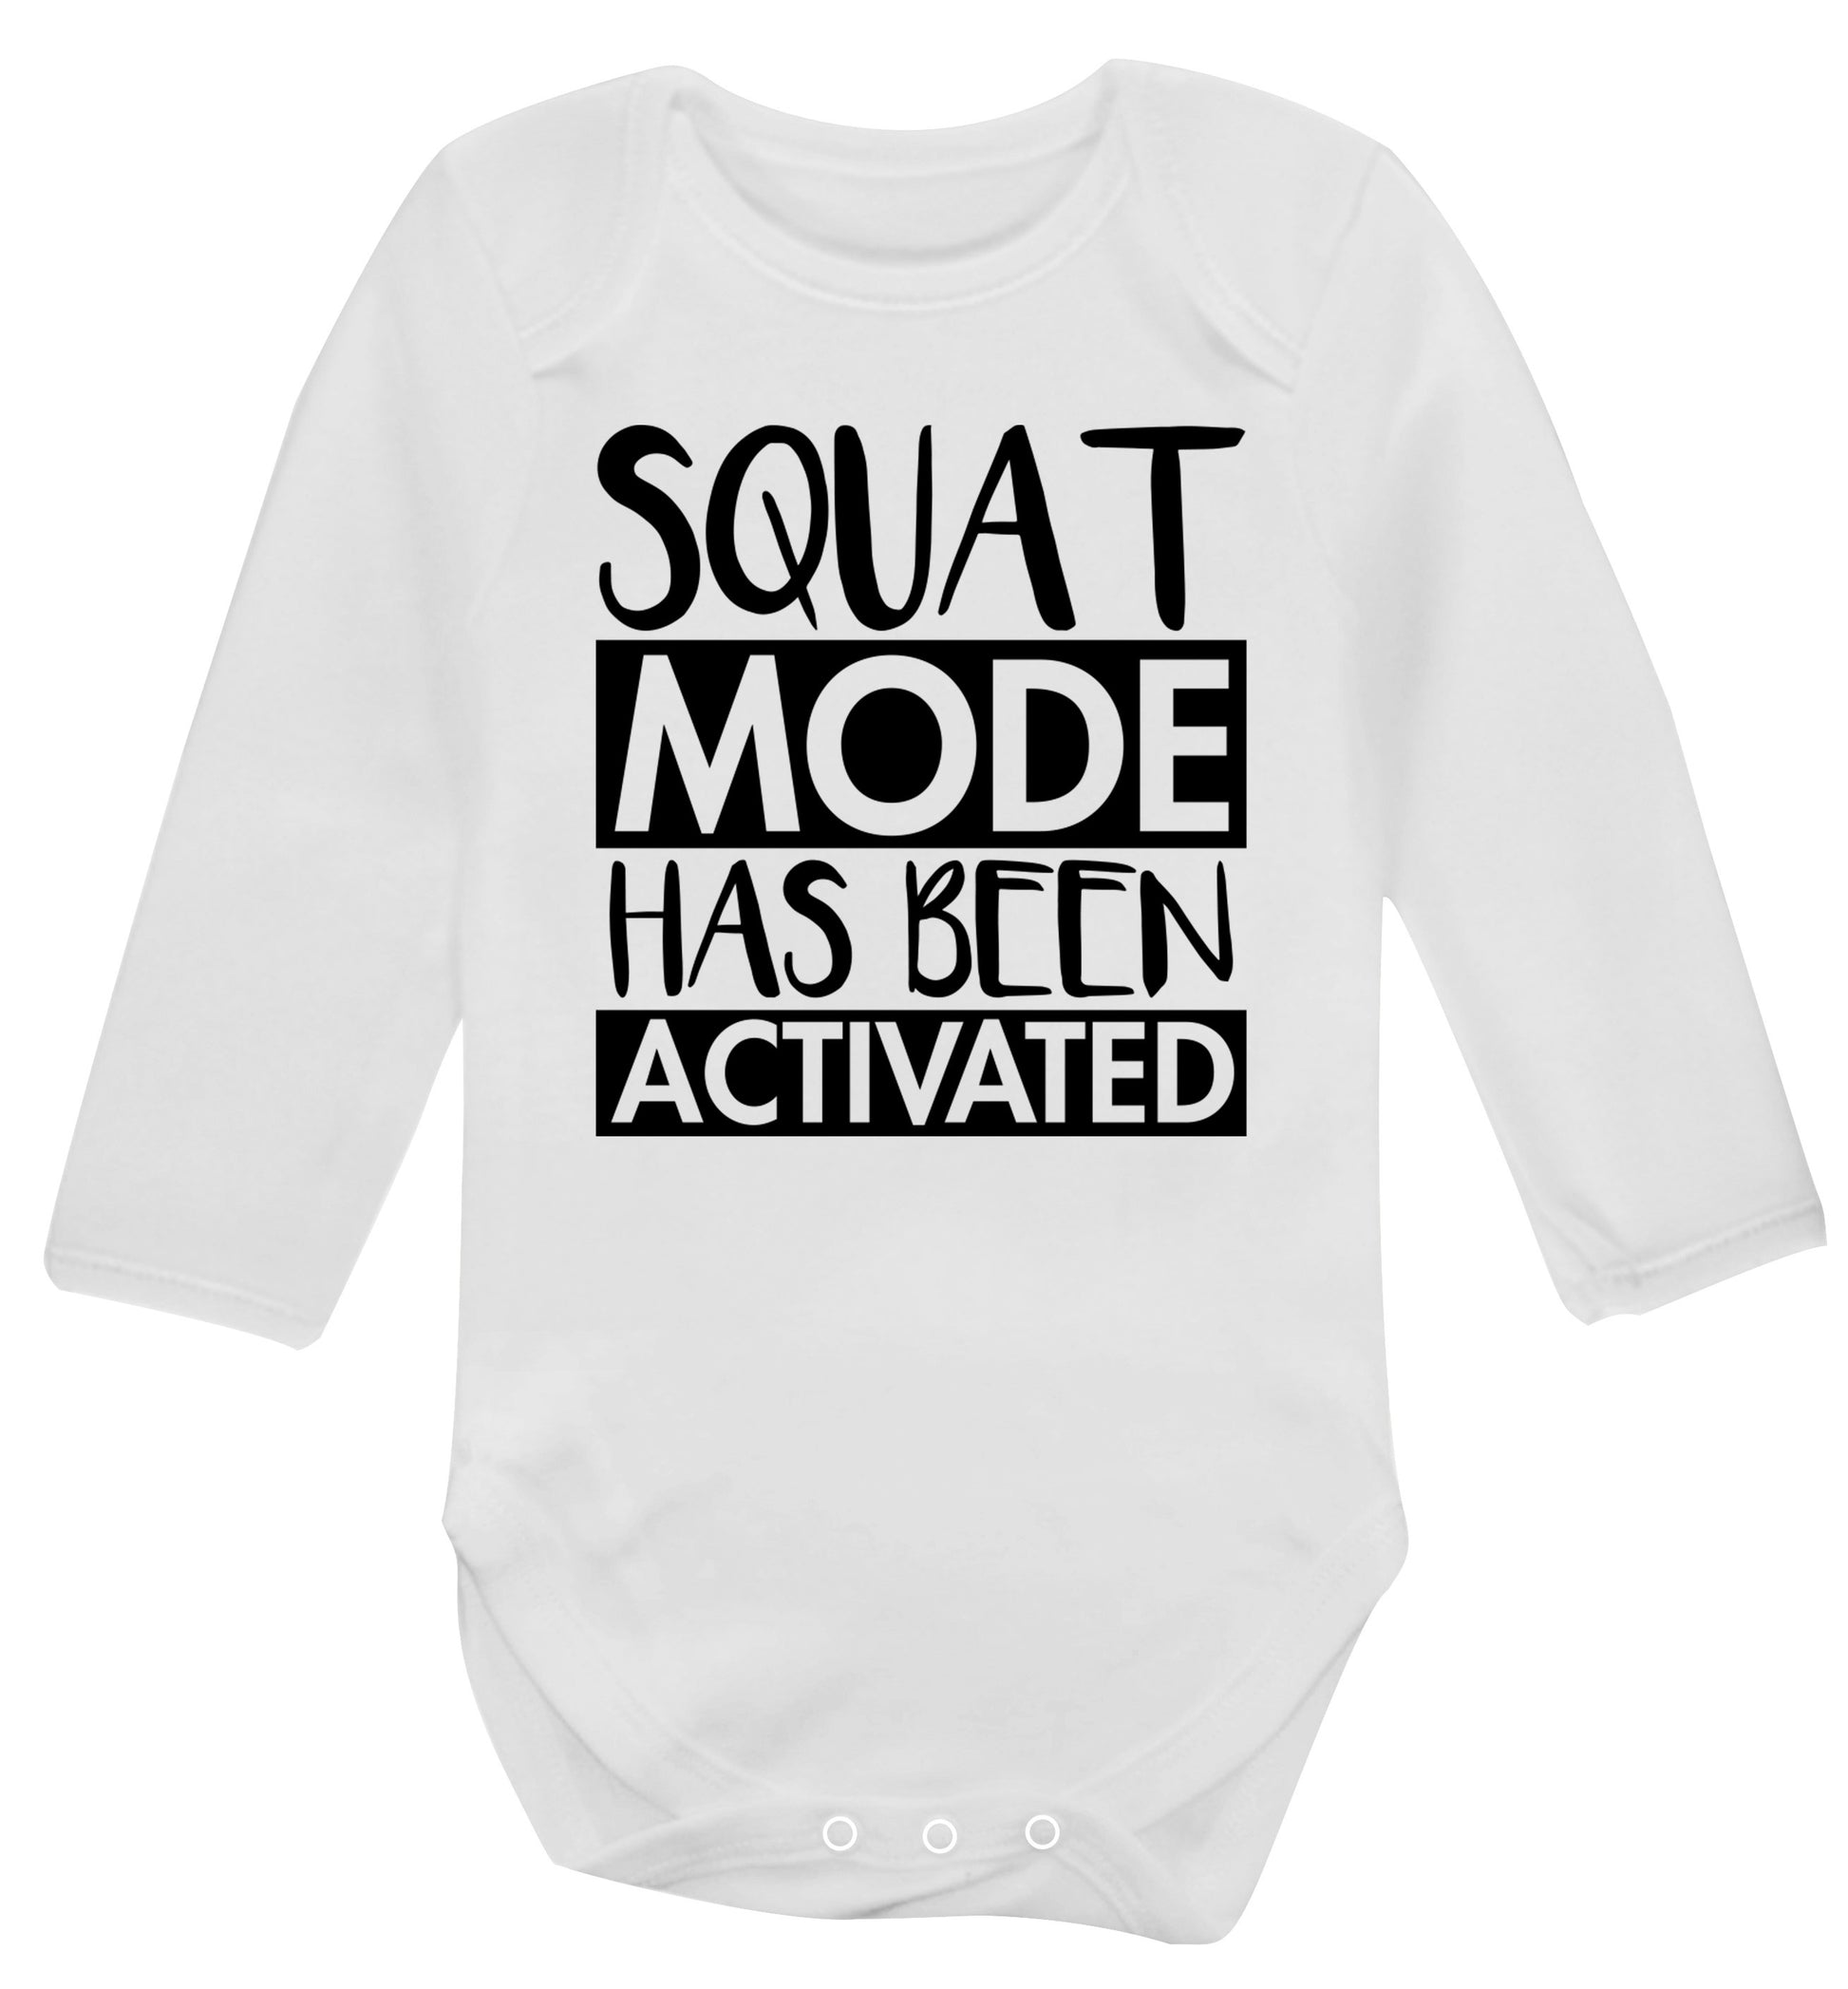 Squat mode activated Baby Vest long sleeved white 6-12 months